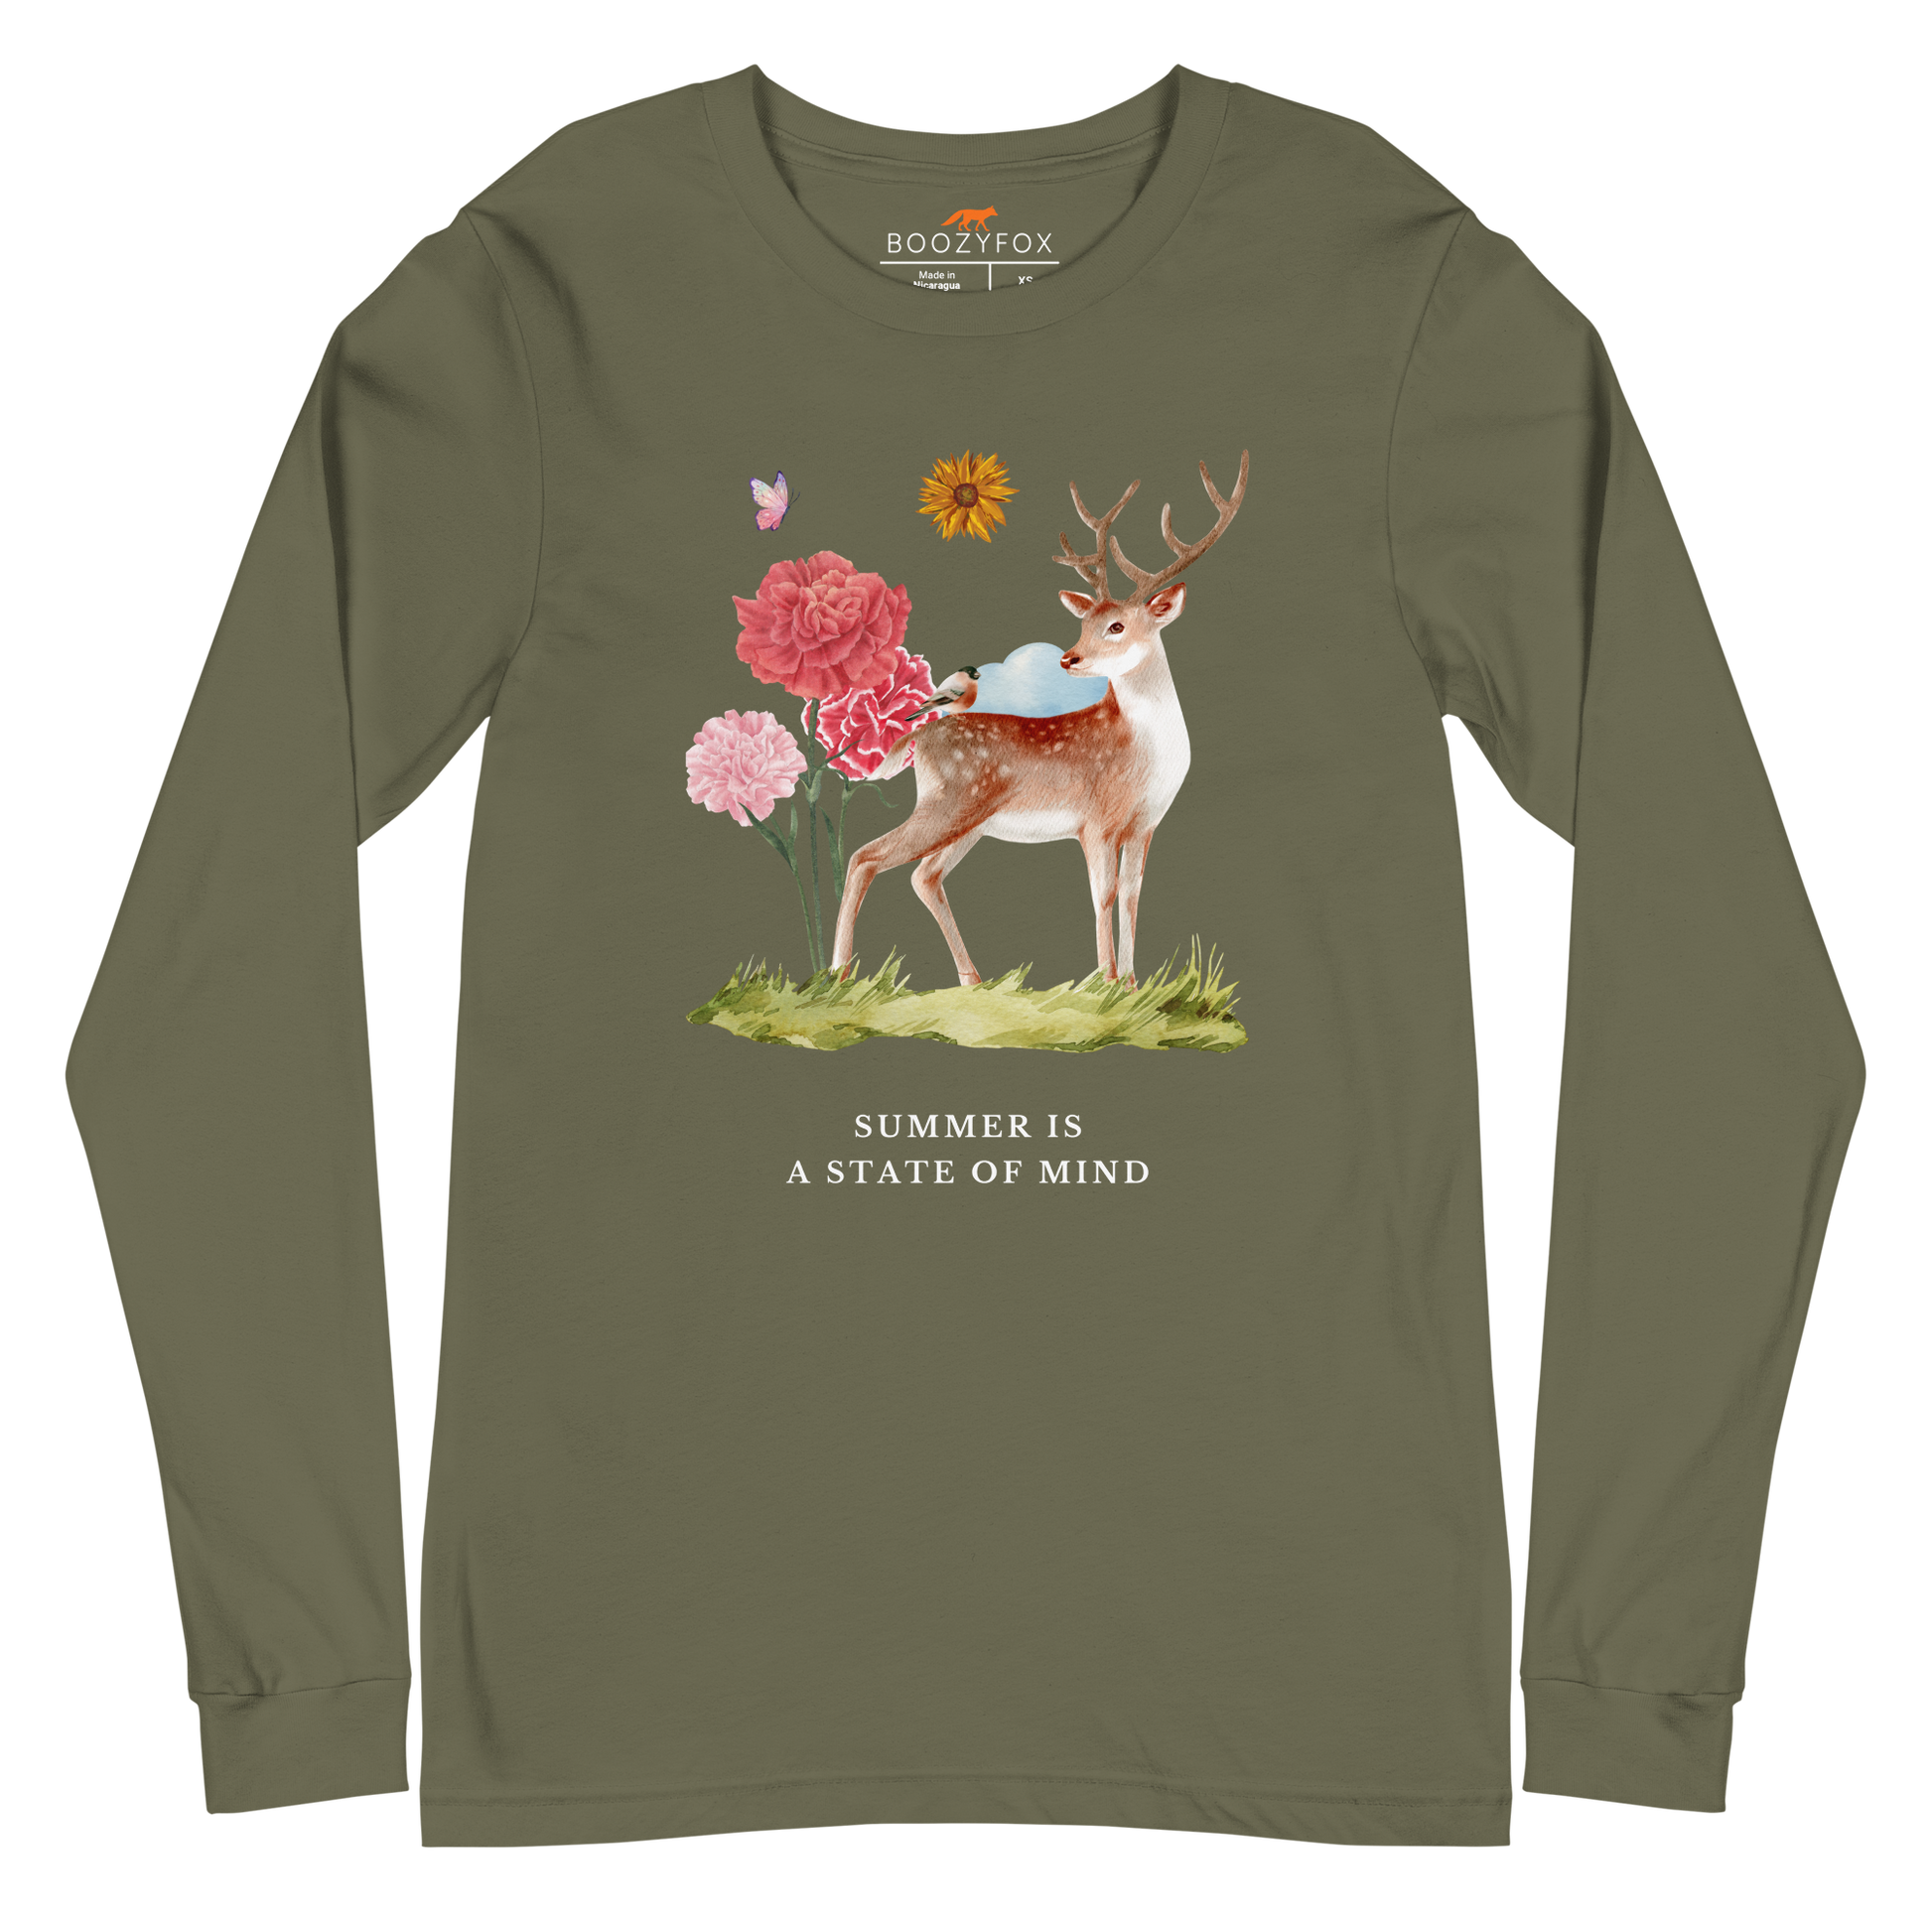 Military Green Summer Is a State of Mind Long Sleeve Tee featuring a Summer Is a State of Mind graphic on the chest - Cute Summer Long Sleeve Graphic Tees - Boozy Fox